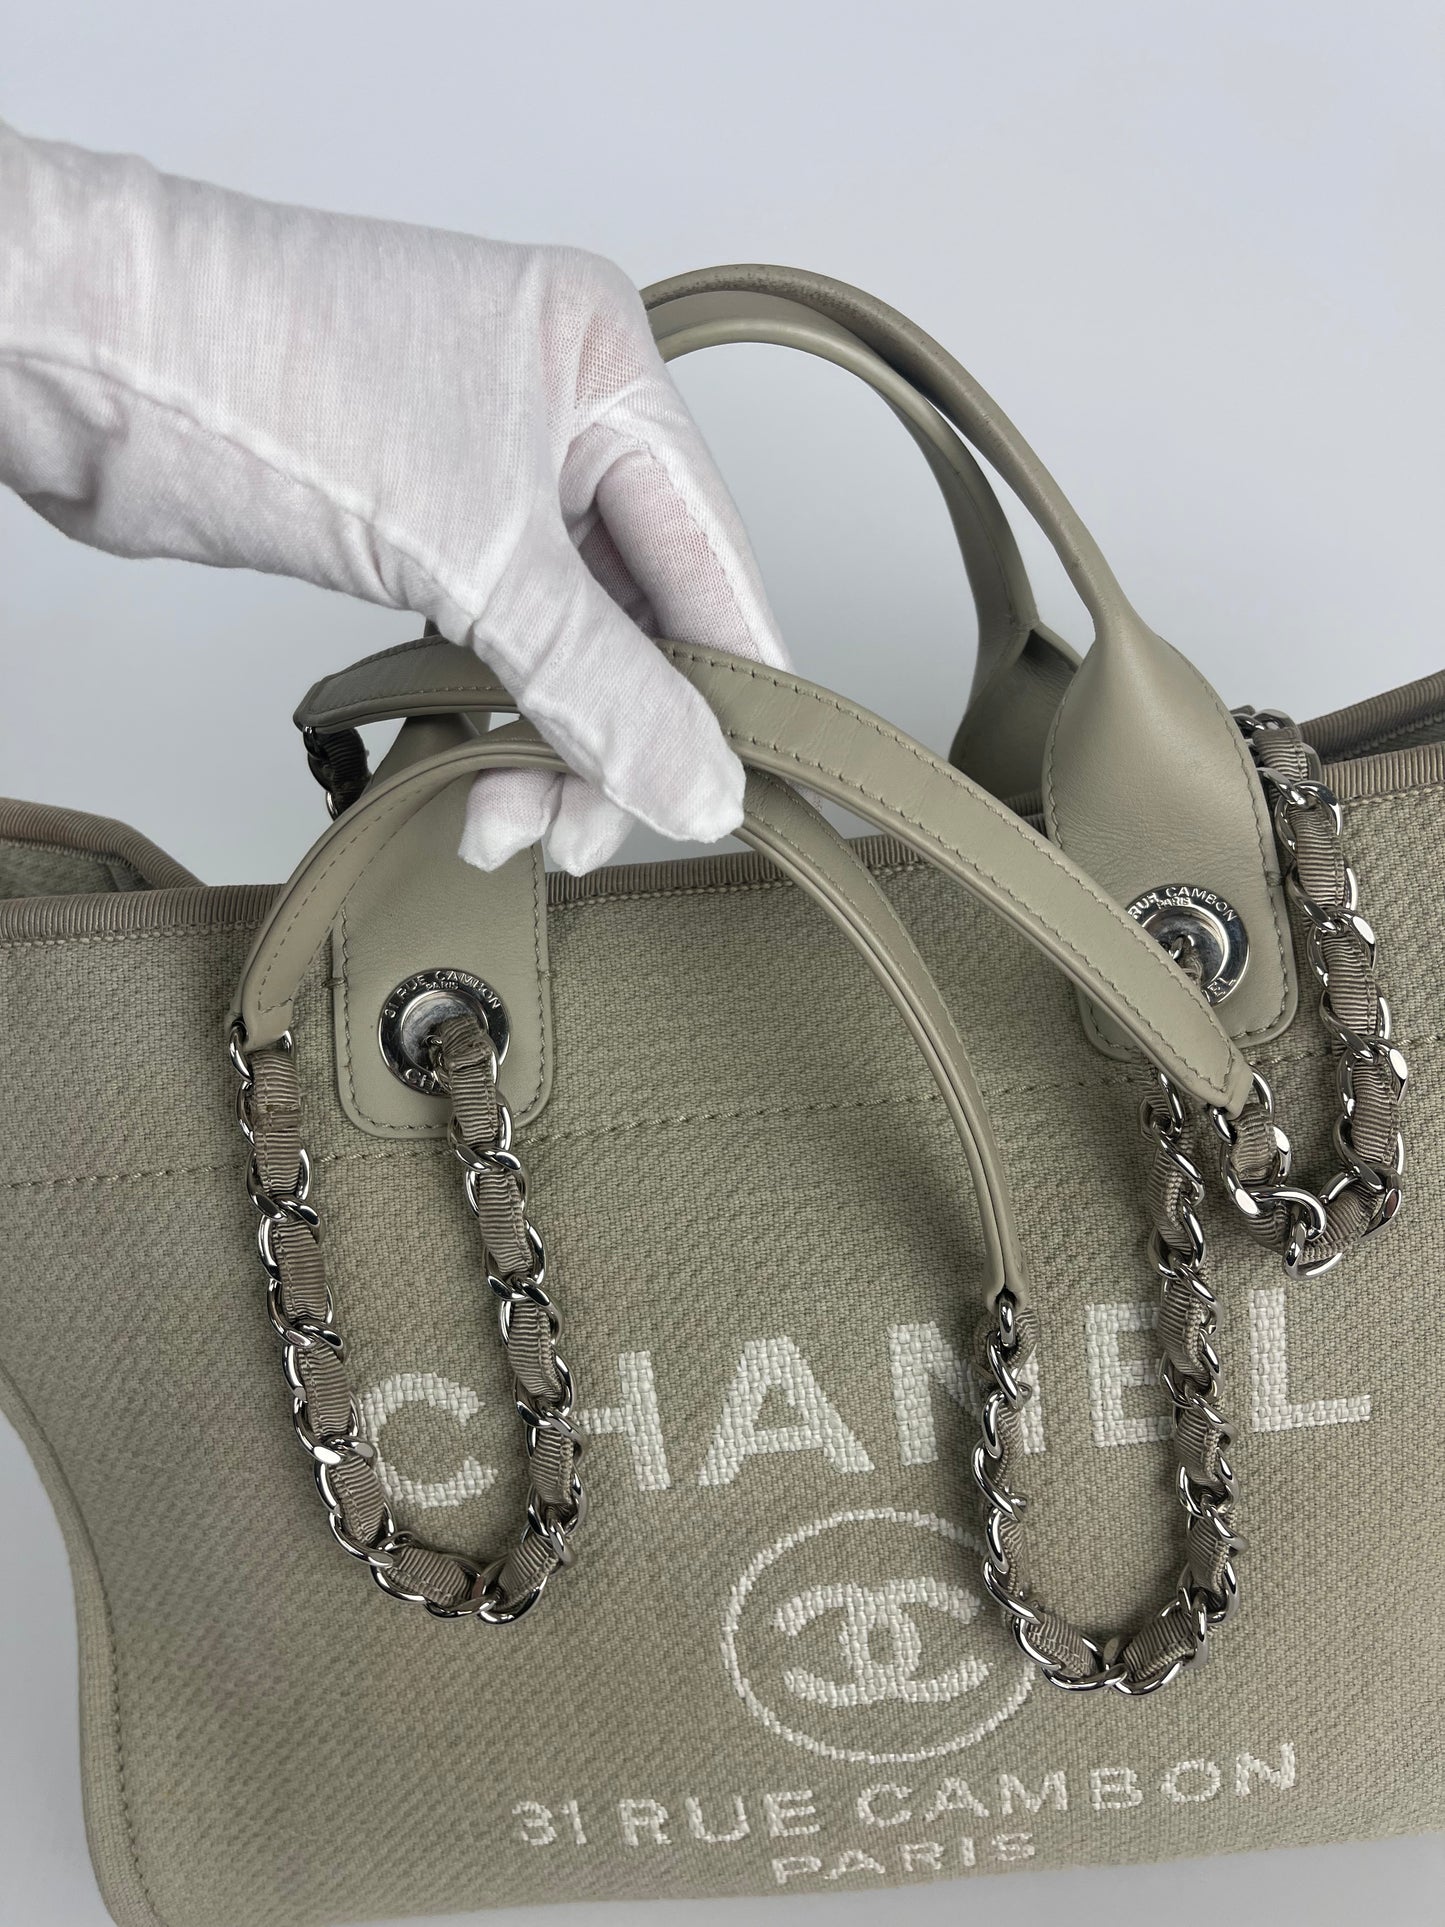 CHANEL LARGE DEAUVILLE